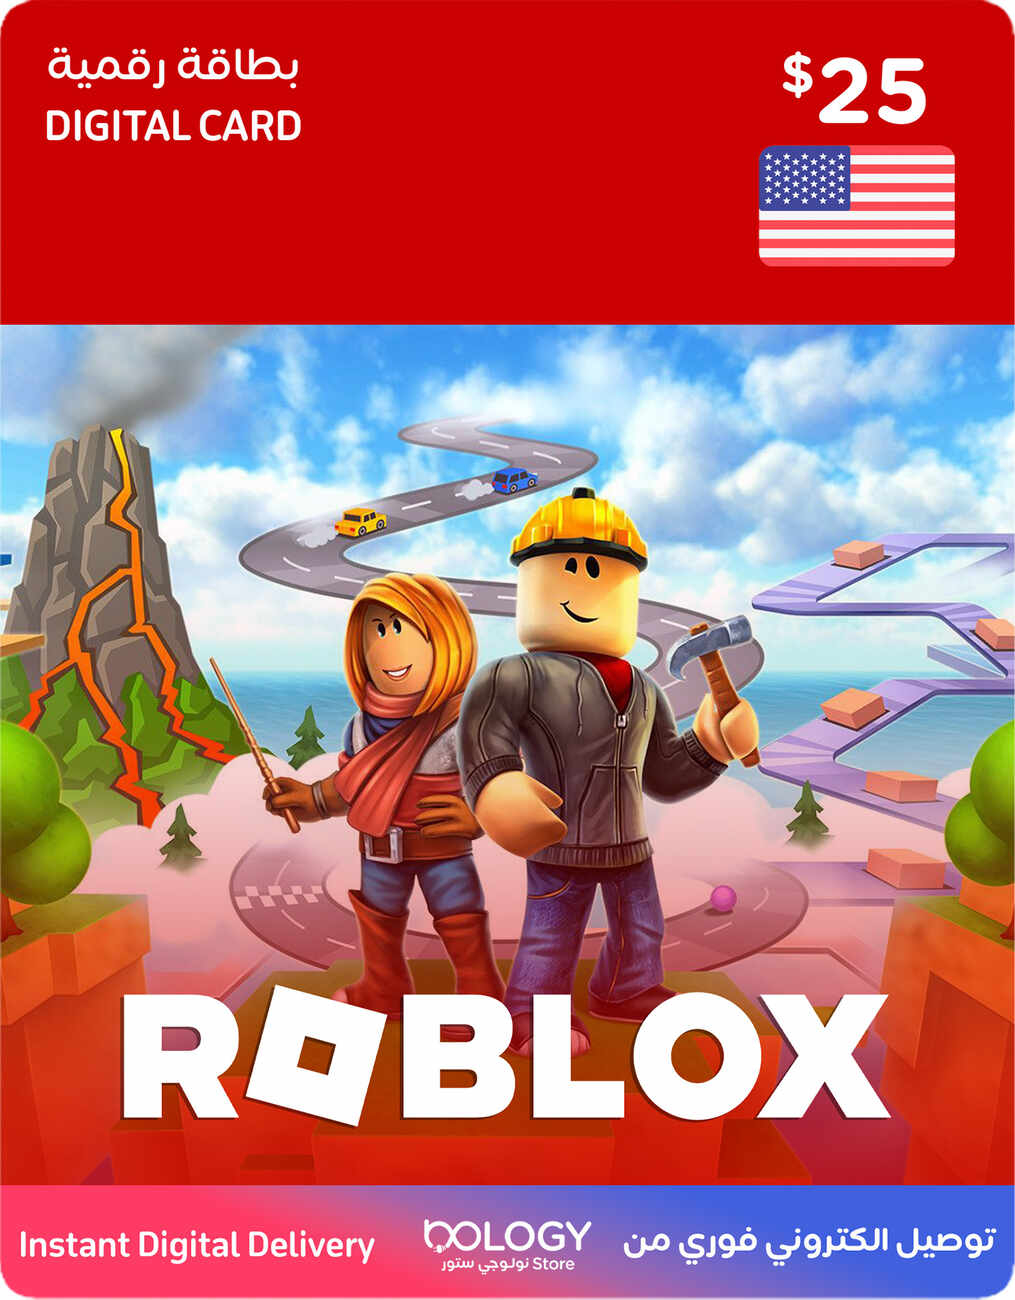 Roblox gift card offers - get Robux deals delivered instantly